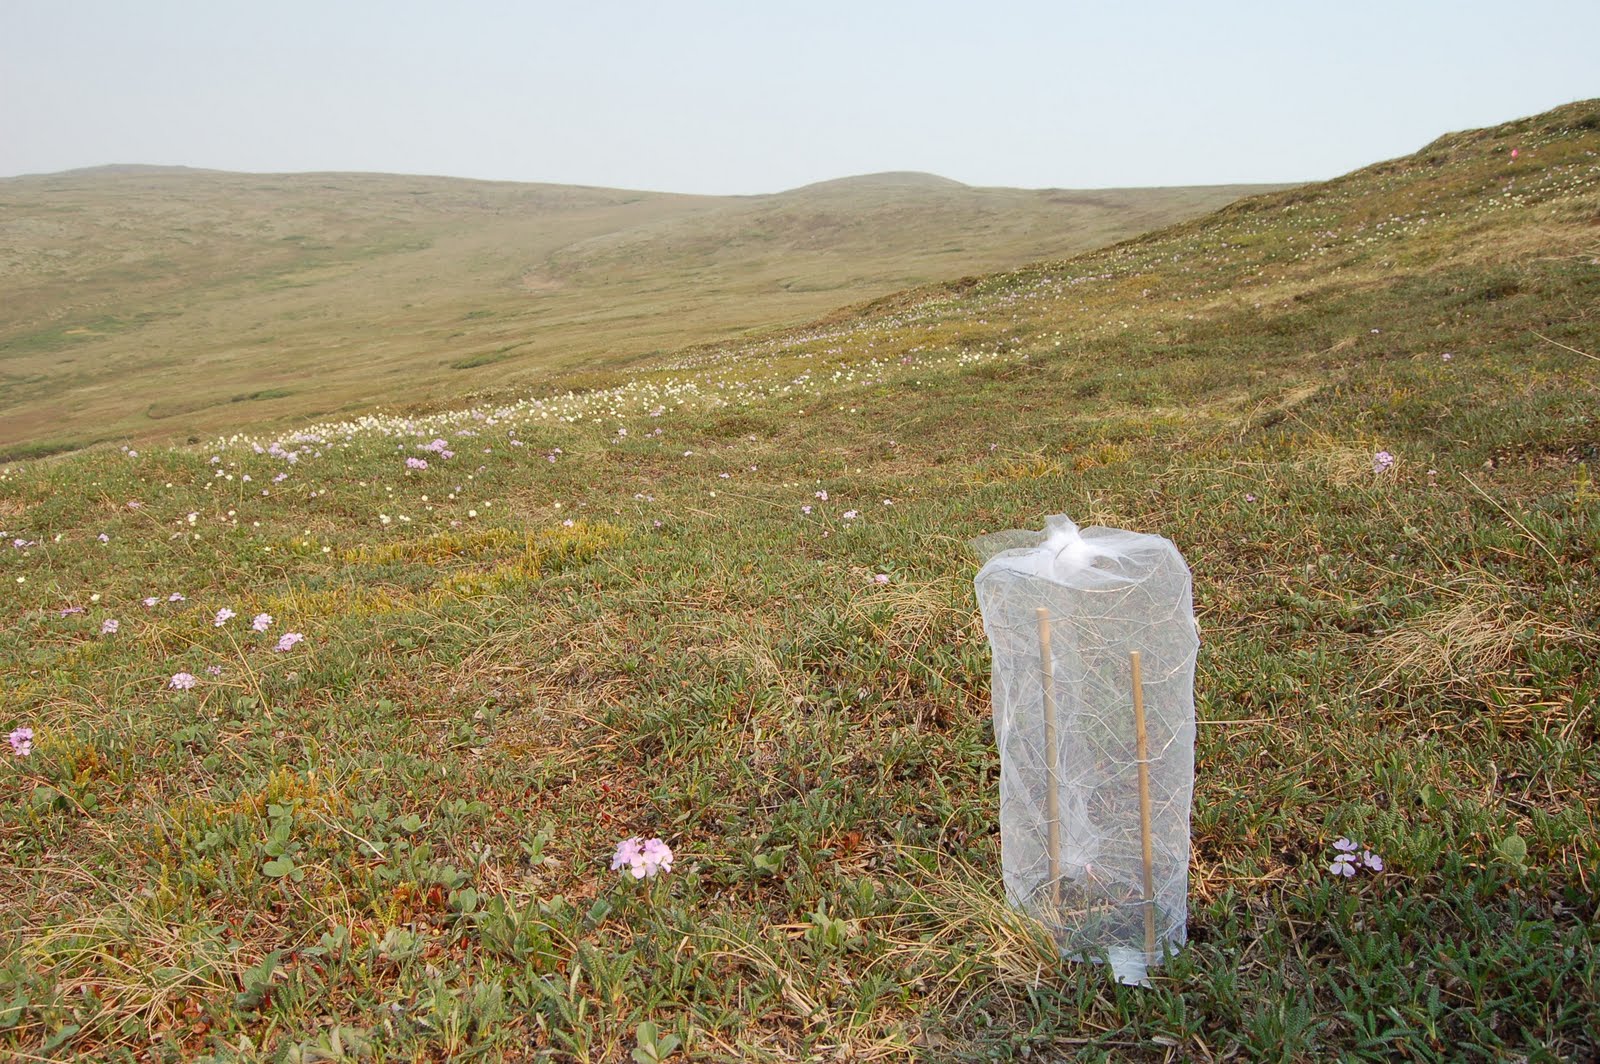 a tall pollinator exclusion net covers a group of Parrya nudicaulis flowers